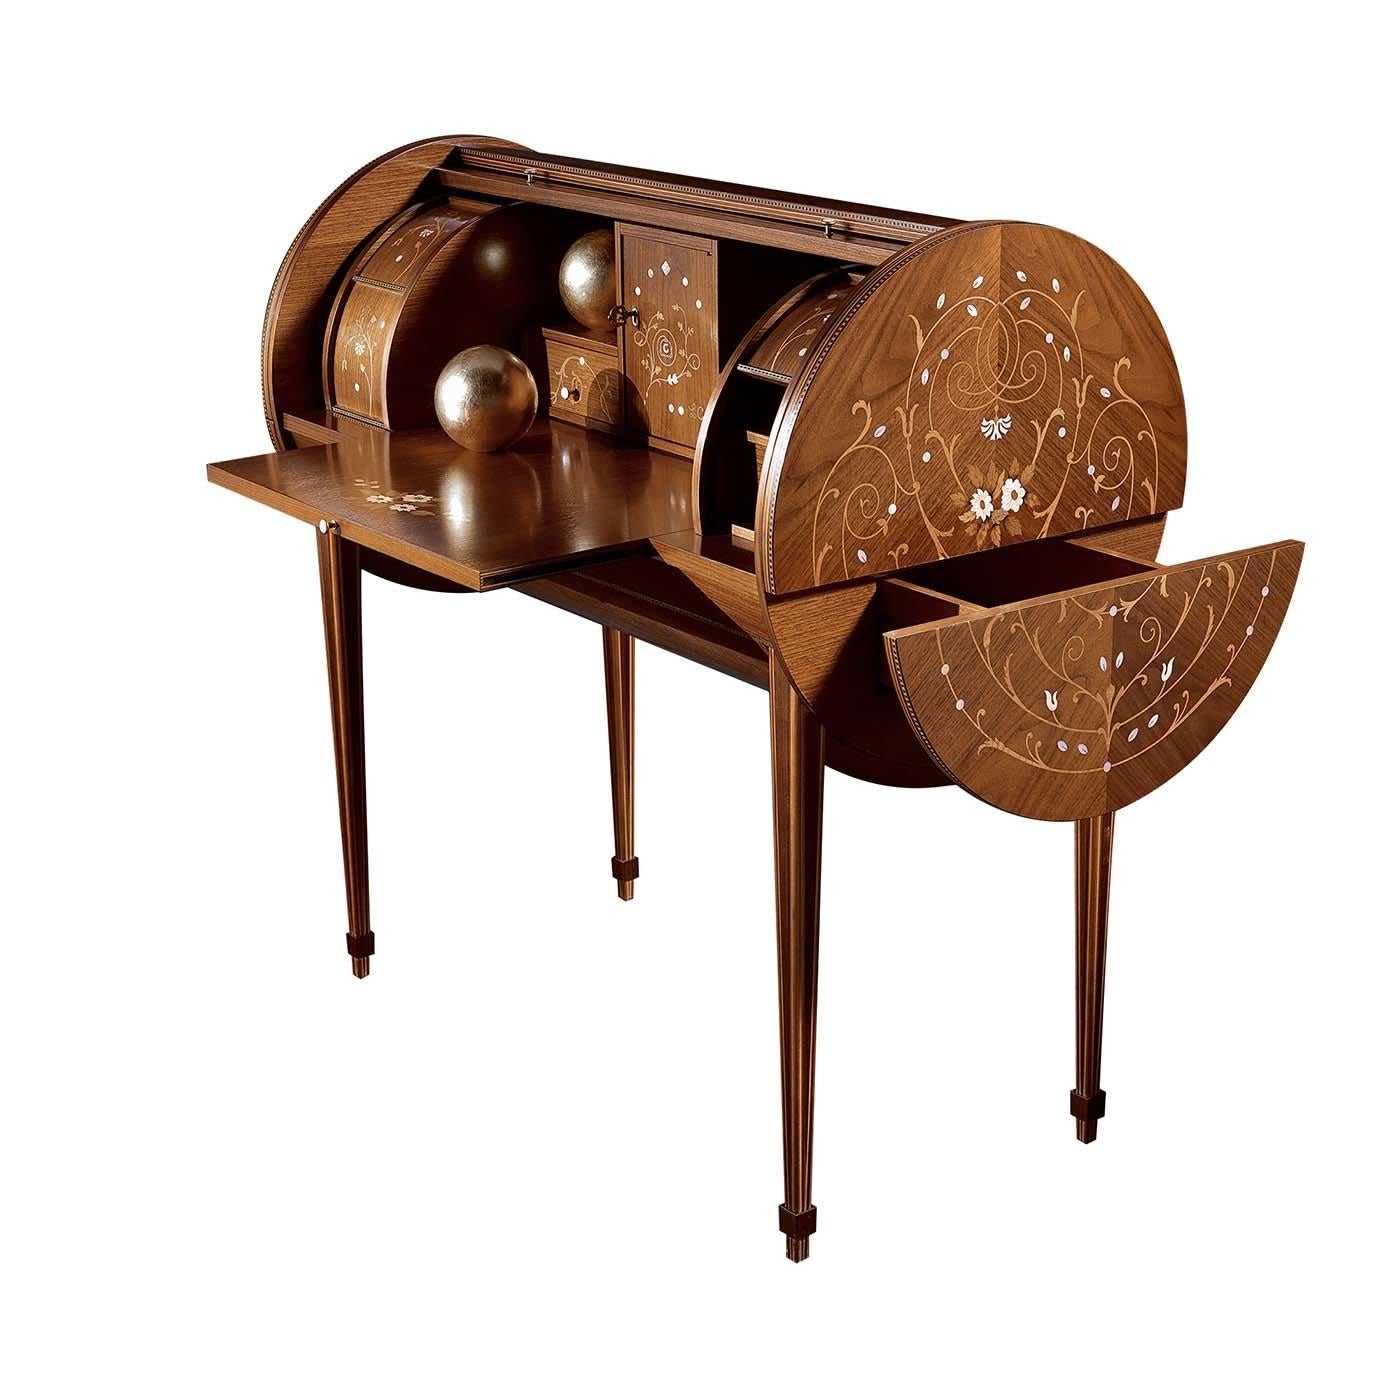 A stunning objet d'art that will add a lavish and refined accent in a private study or living room, this desk was crafted of wood covered in black walnut veneer. The surface of the piece, with its curves and unique silhouette, is adorned throughout